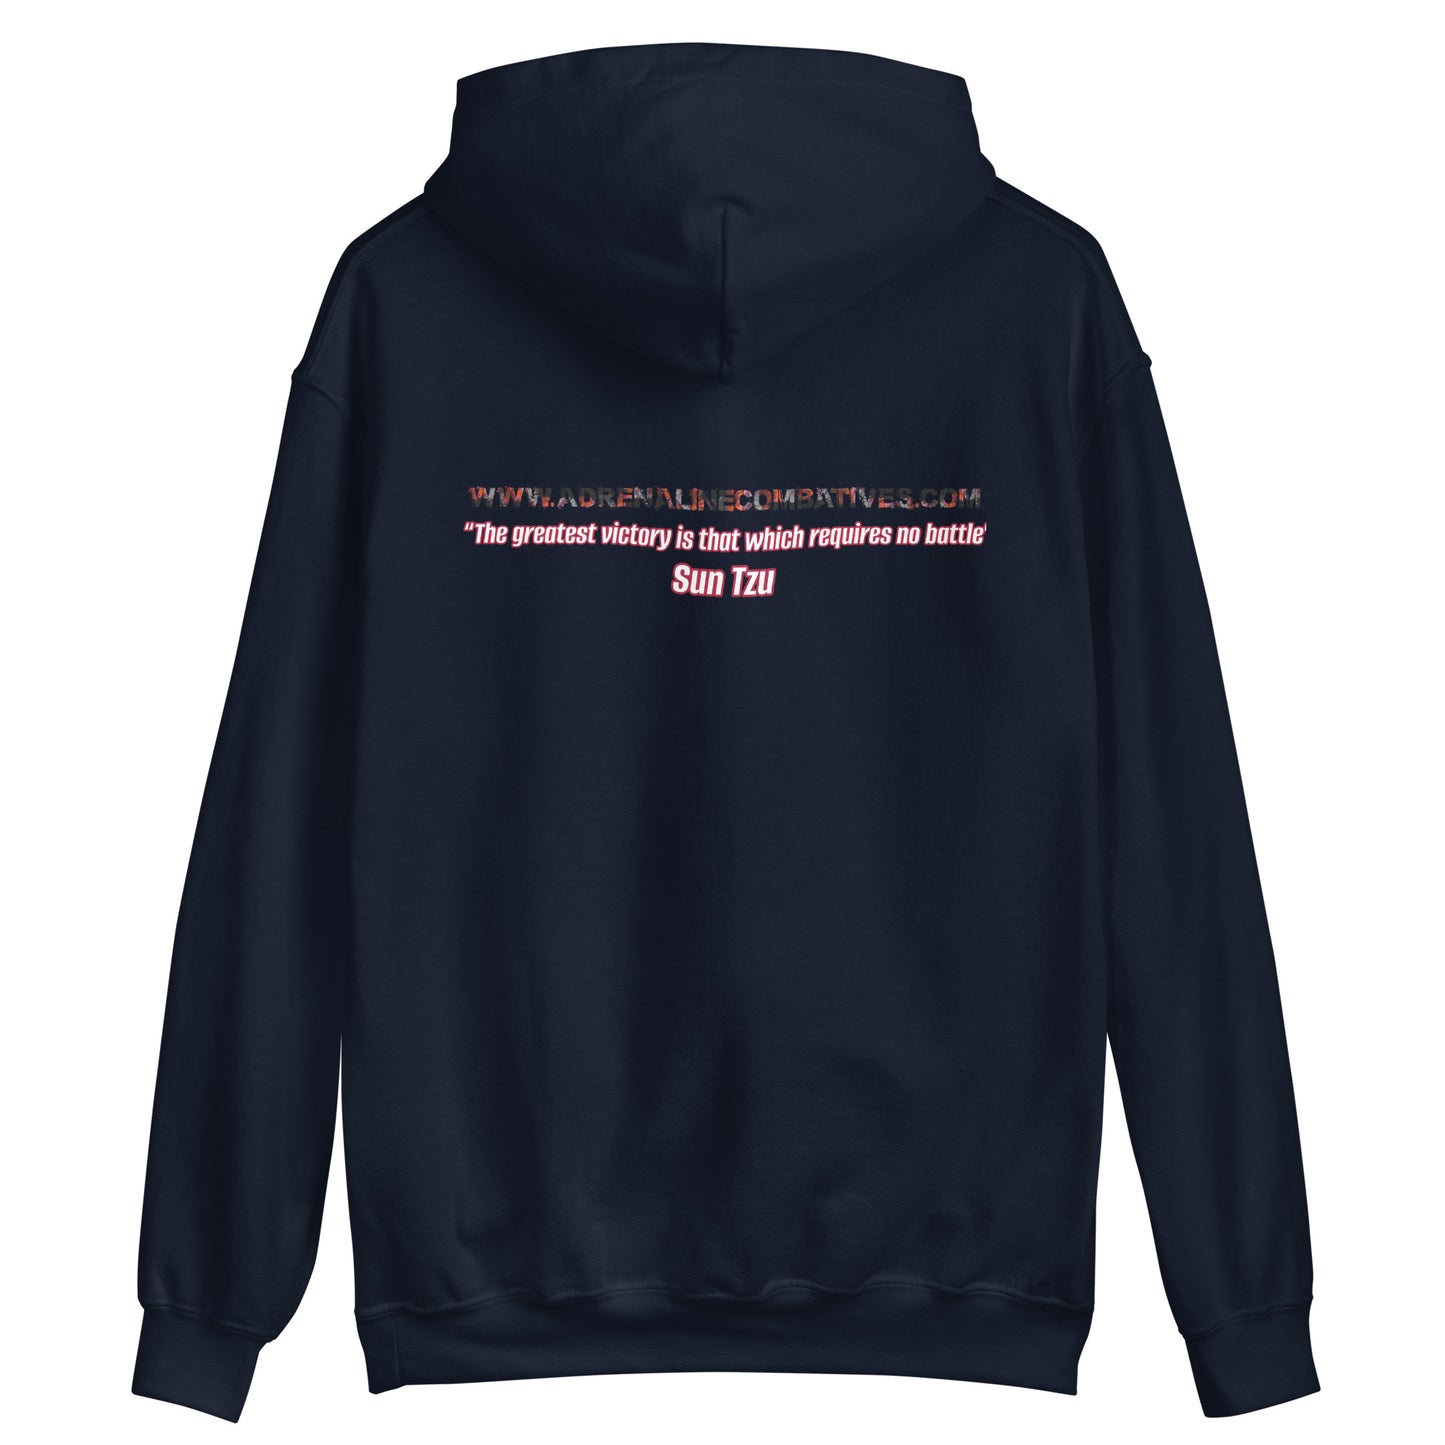 Unisex Hoodie - Adrenaline Combatives - Sun Tzu Quote: “The greatest victory is that which requires no battle”